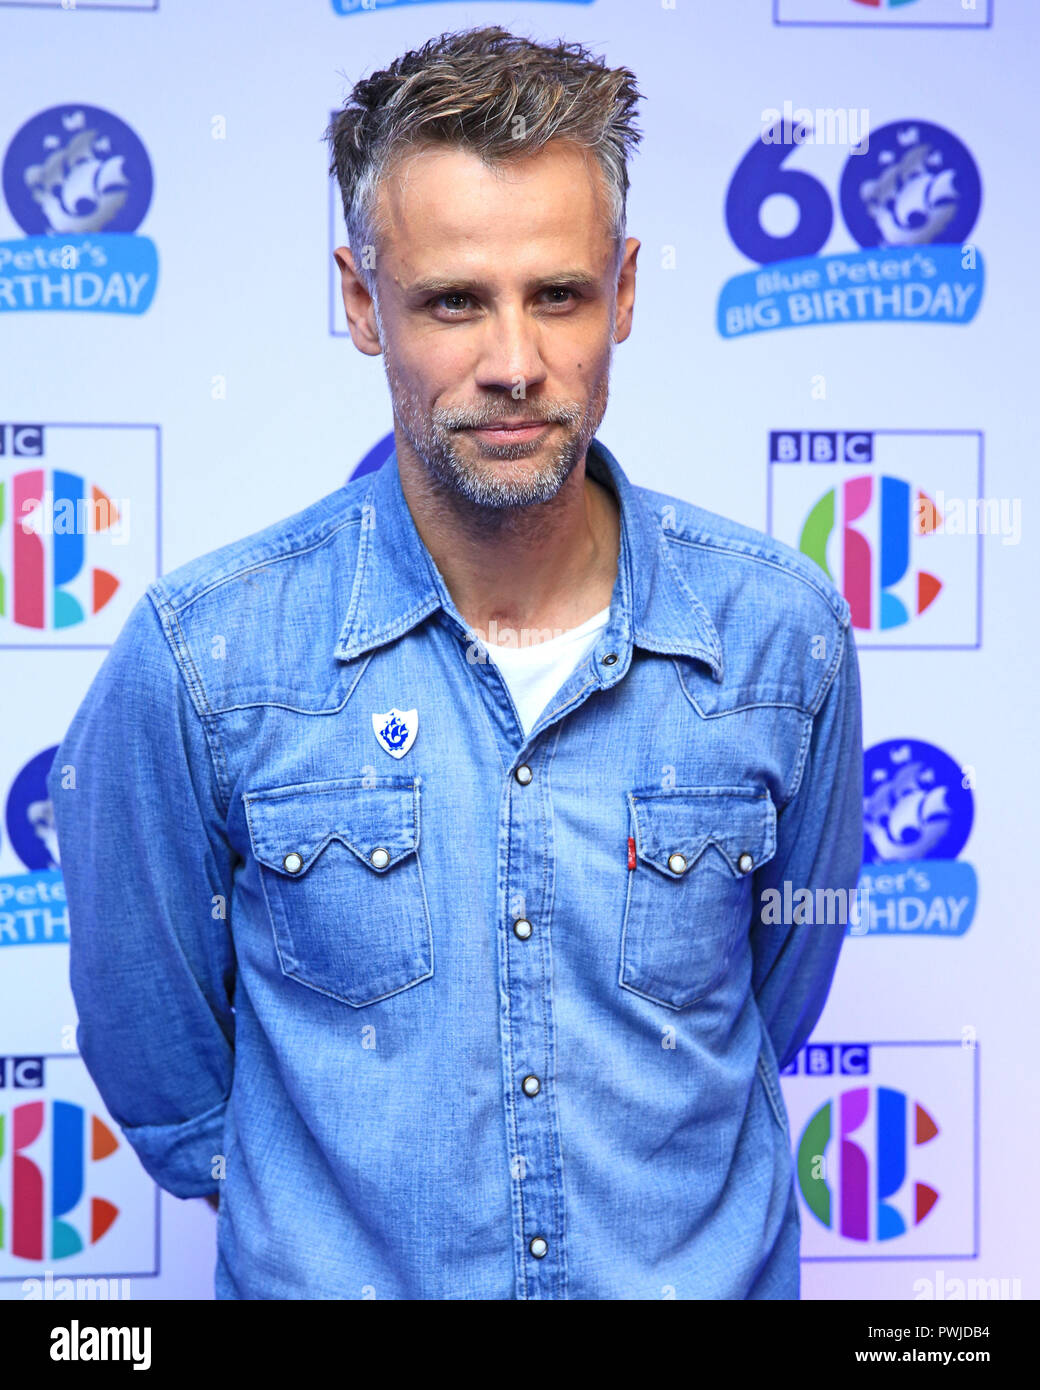 Richard Bacon attends Blue Peter's Big Birthday, celebrating the show's 60th anniversary, at the BBC Philharmonic Studio at Media City UK, Salford. Stock Photo